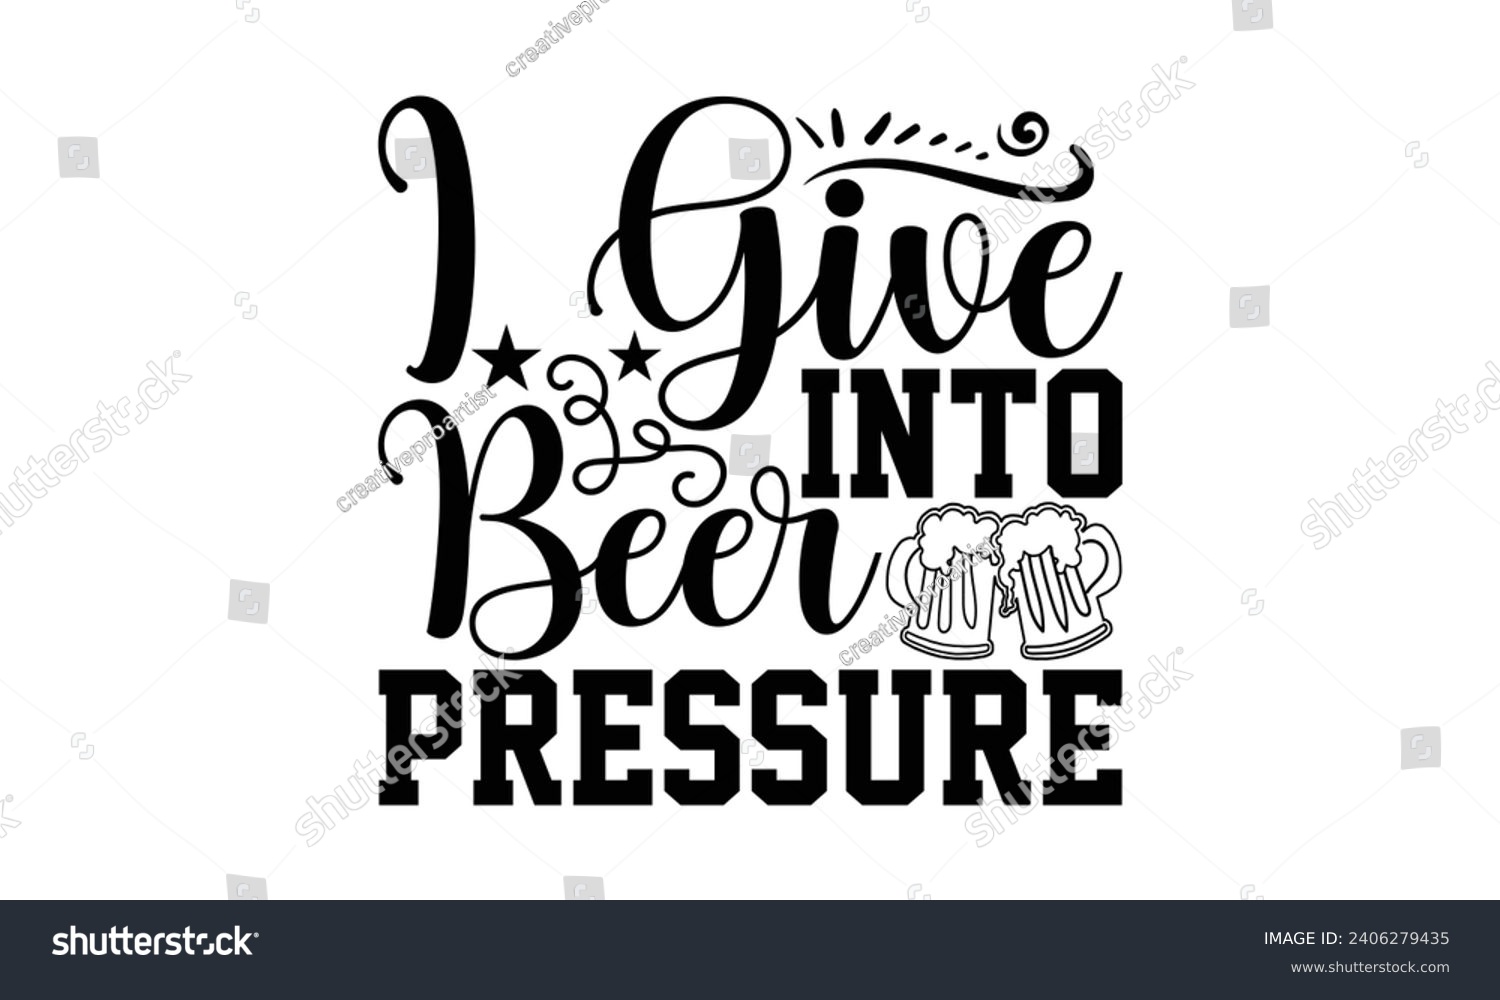 SVG of I Give Into Beer Pressure- Beer t- shirt design, Handmade calligraphy vector illustration for Cutting Machine, Silhouette Cameo, Cricut, Vector illustration Template. svg